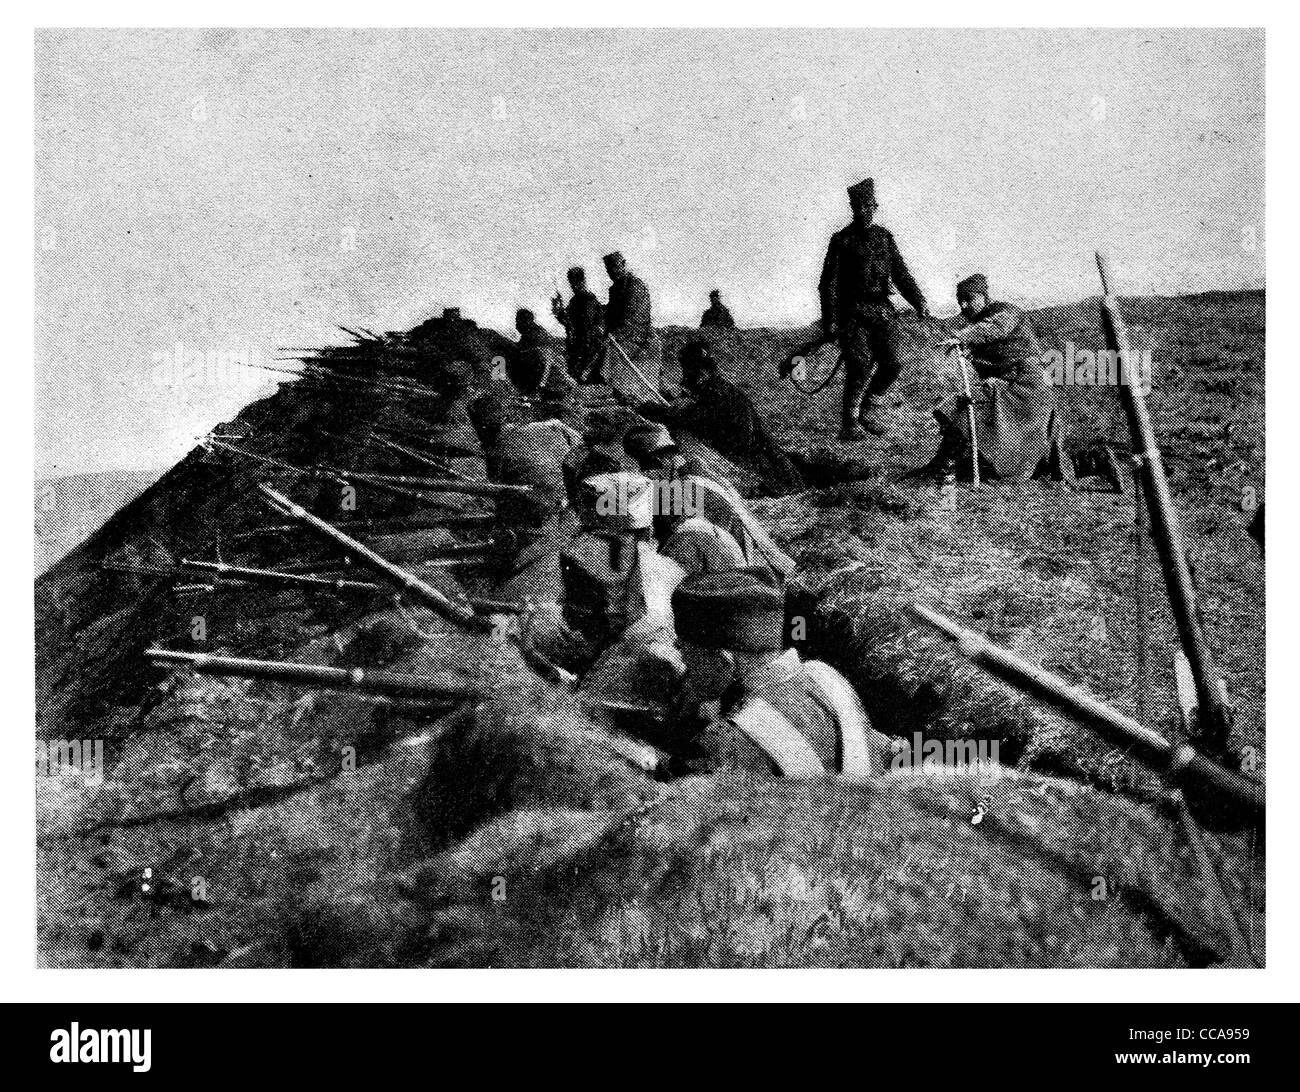 1915 Entrenched Danube Serbian battalion defending waterway against Austro-Germans trench rifle defence defend officer river Stock Photo